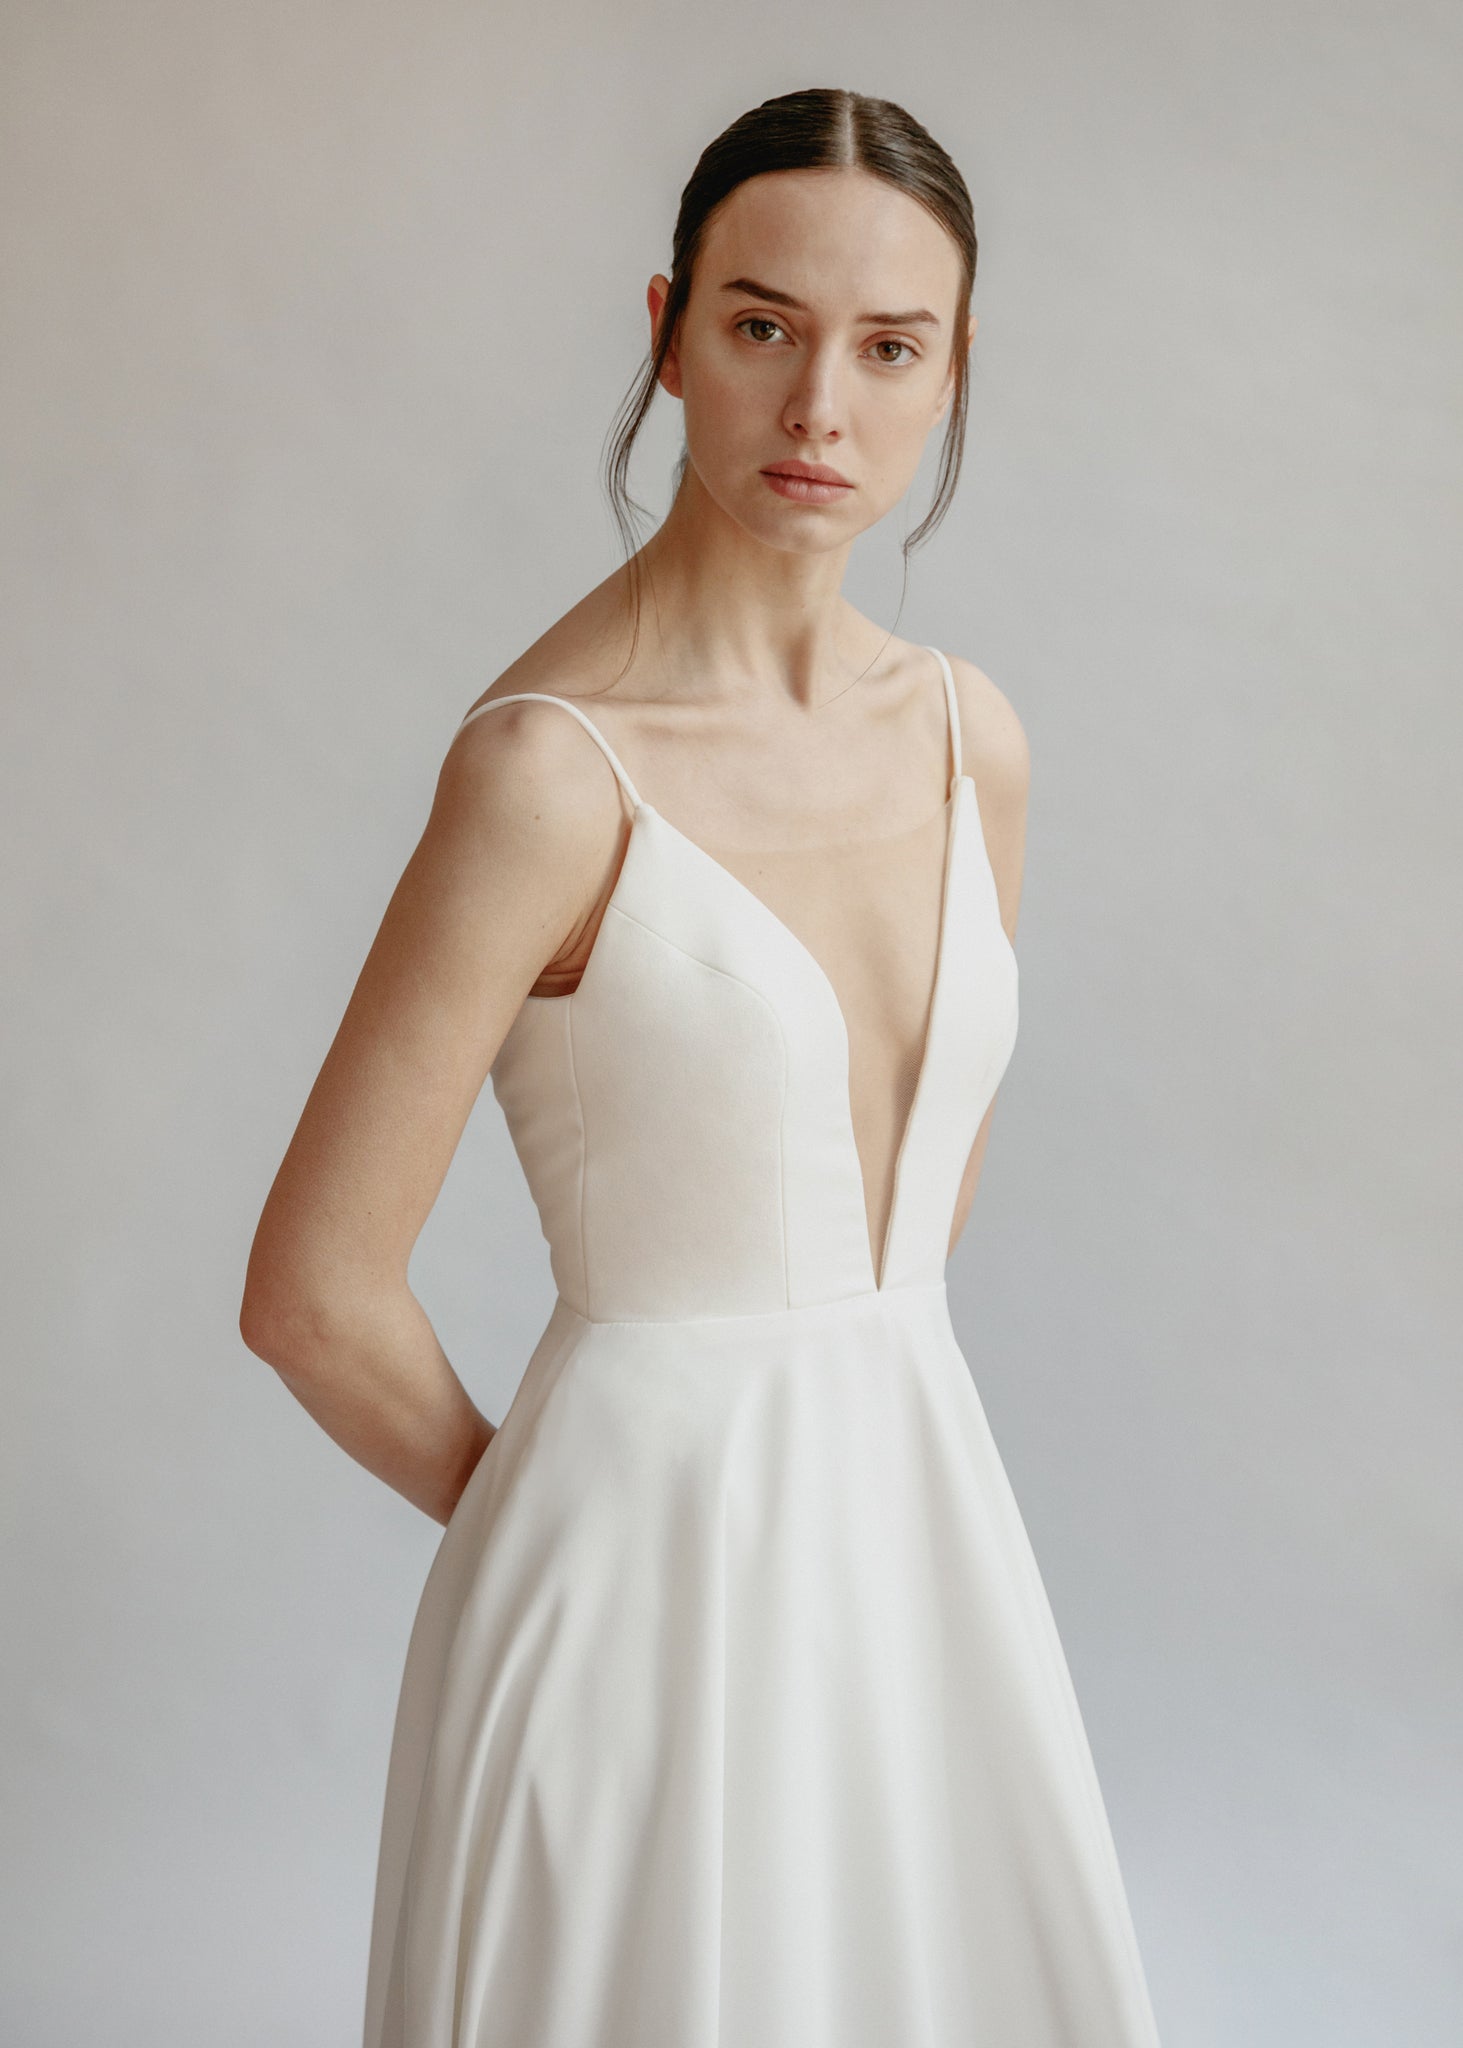 Low cut simple a-line wedding dress with pockets and an extra long train